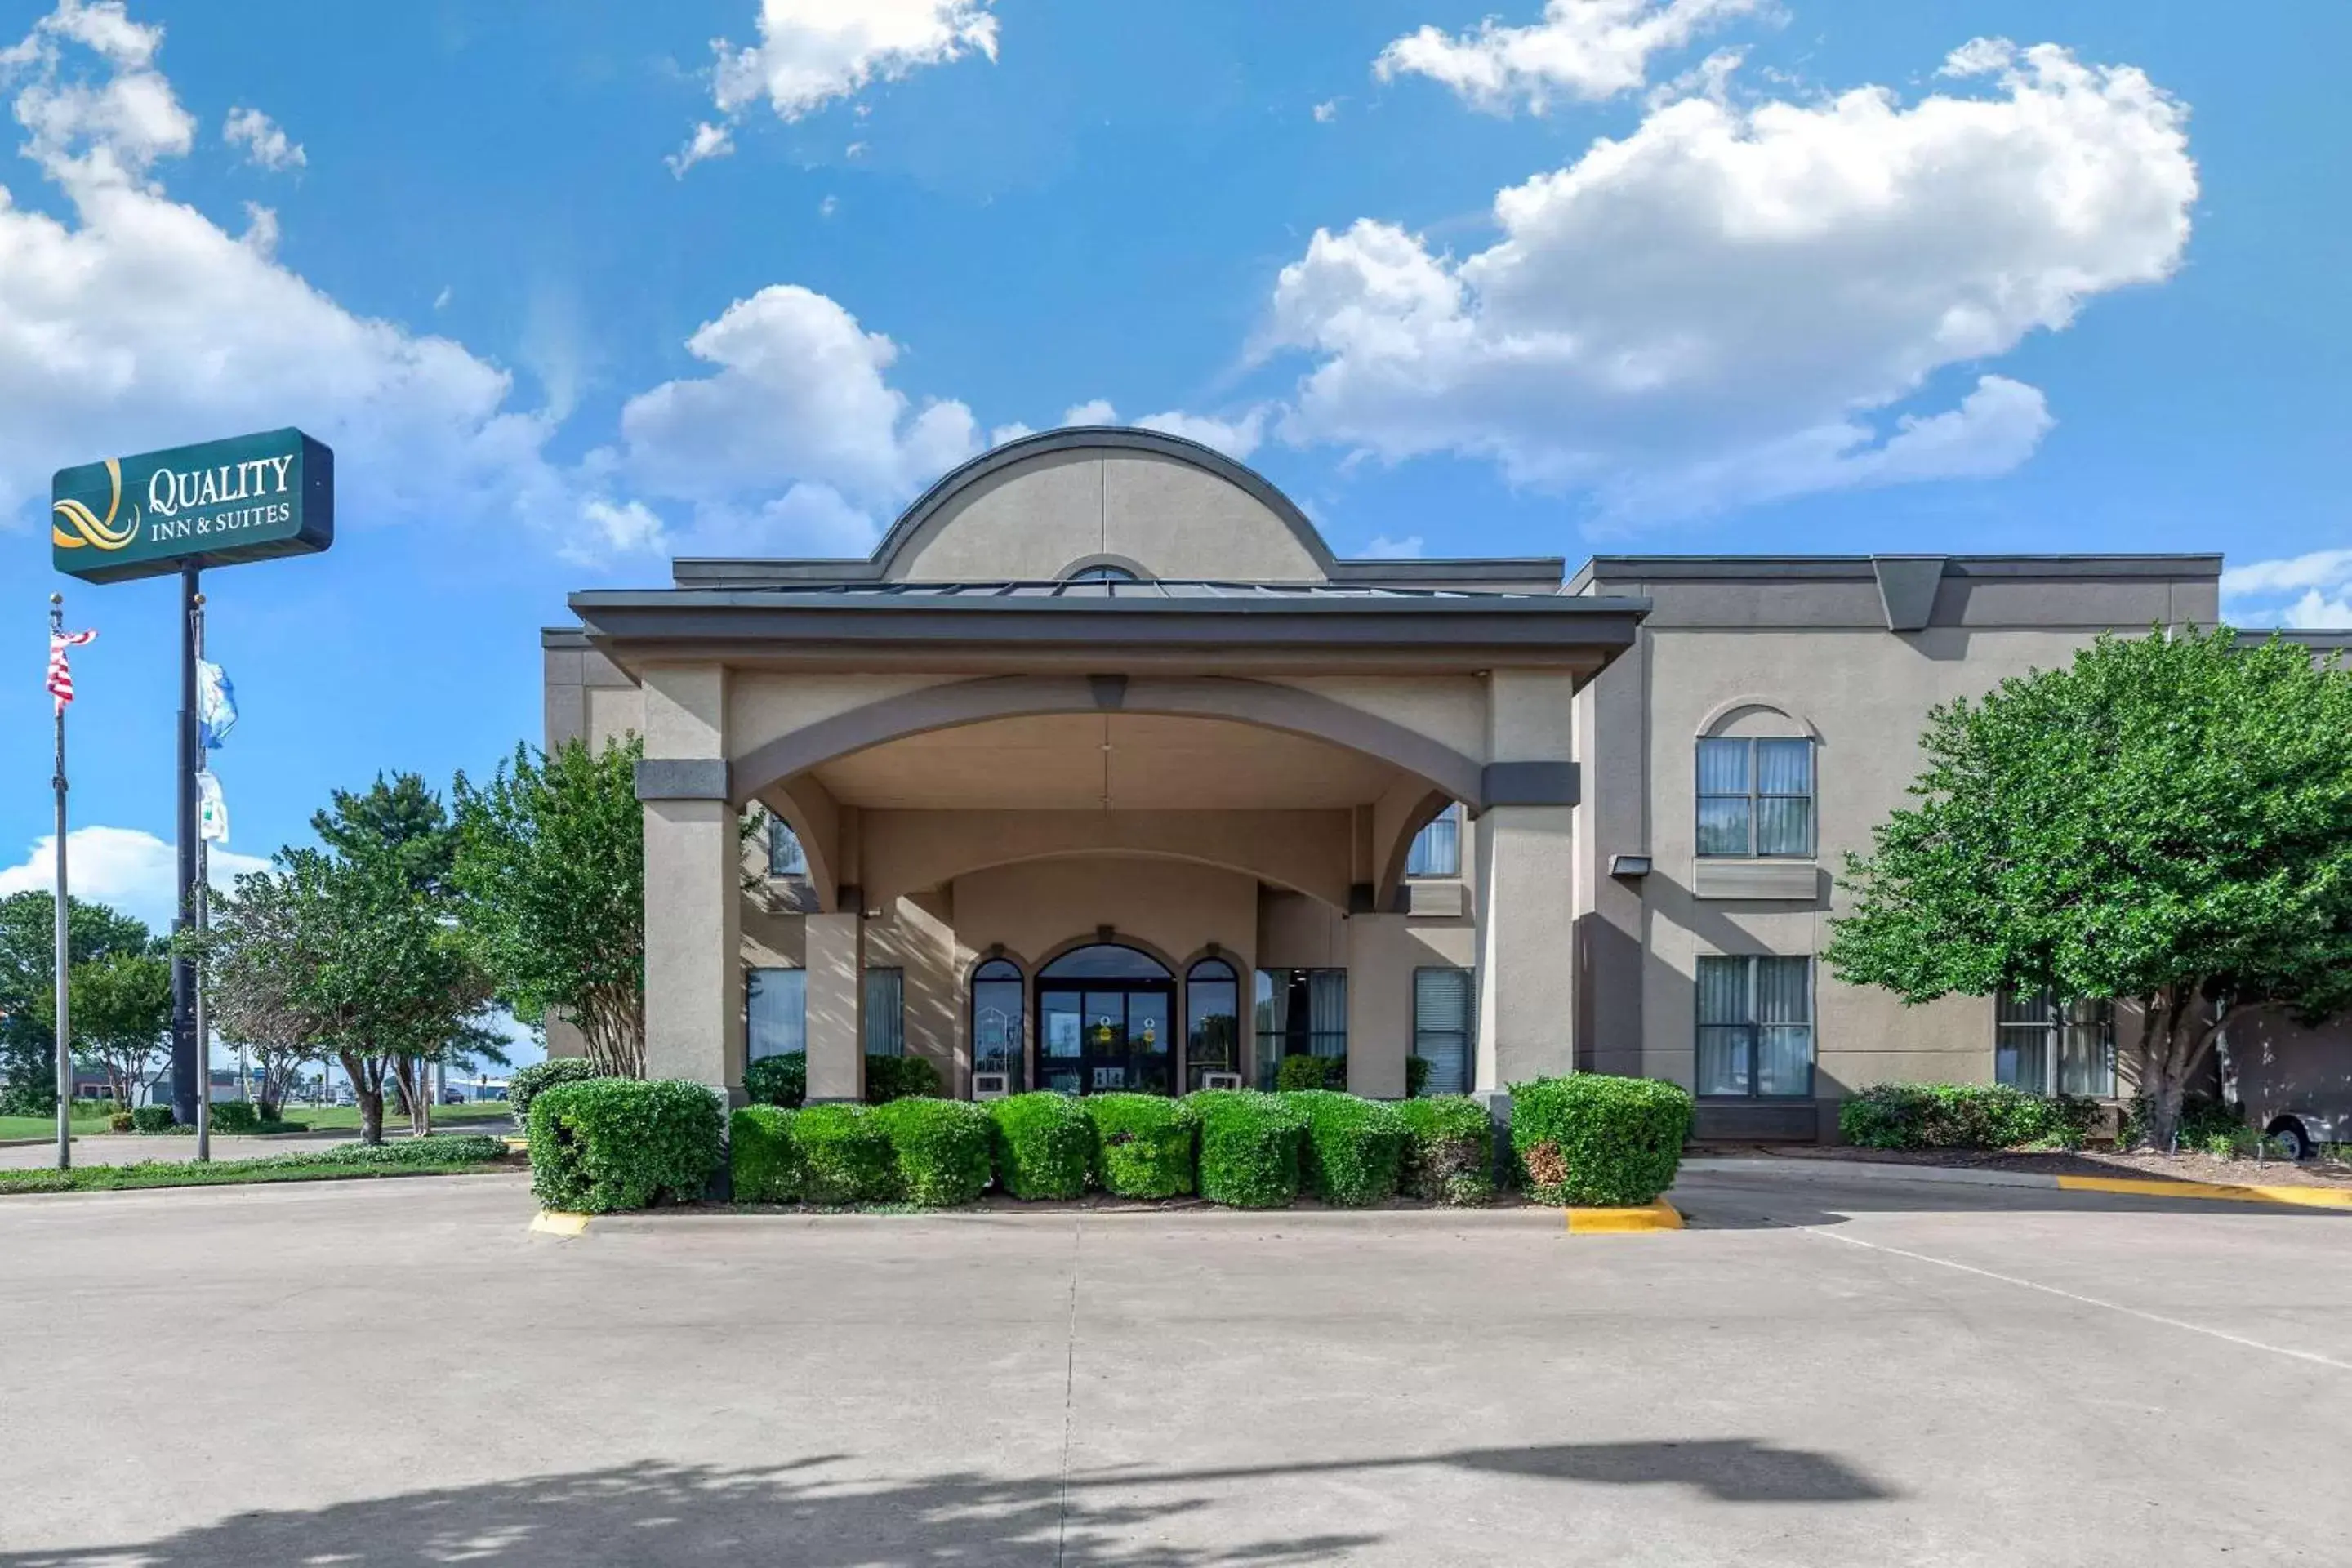 Property building in Quality Inn & Suites Durant